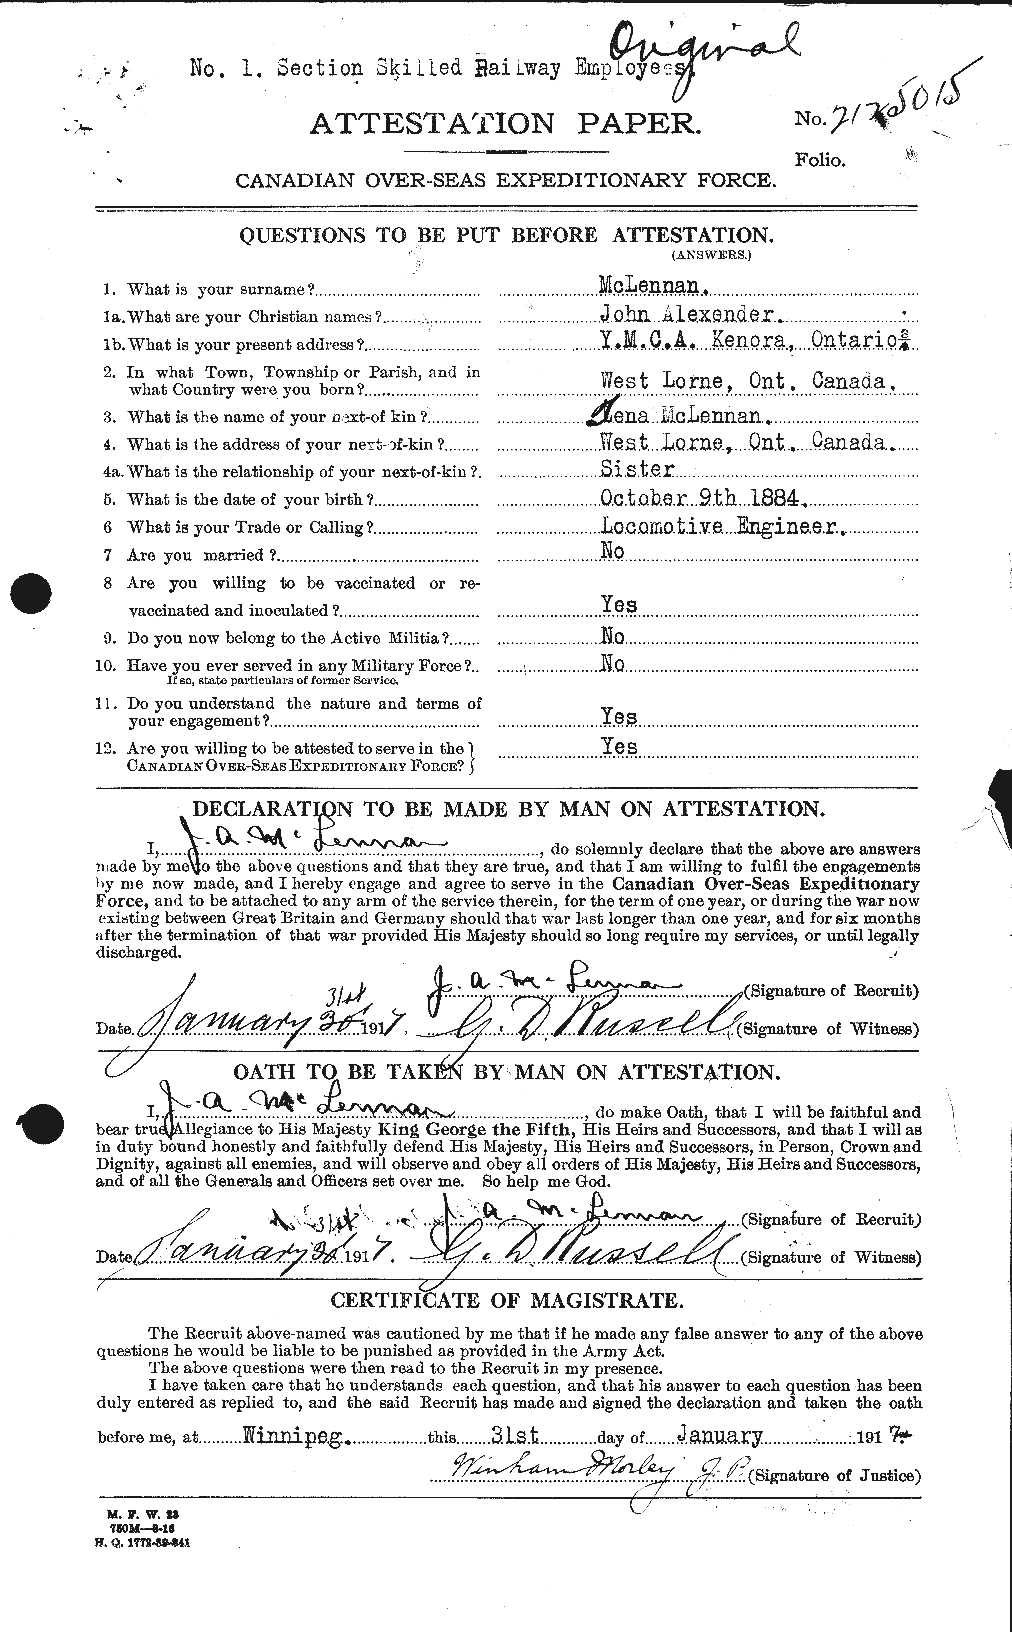 Personnel Records of the First World War - CEF 536542a